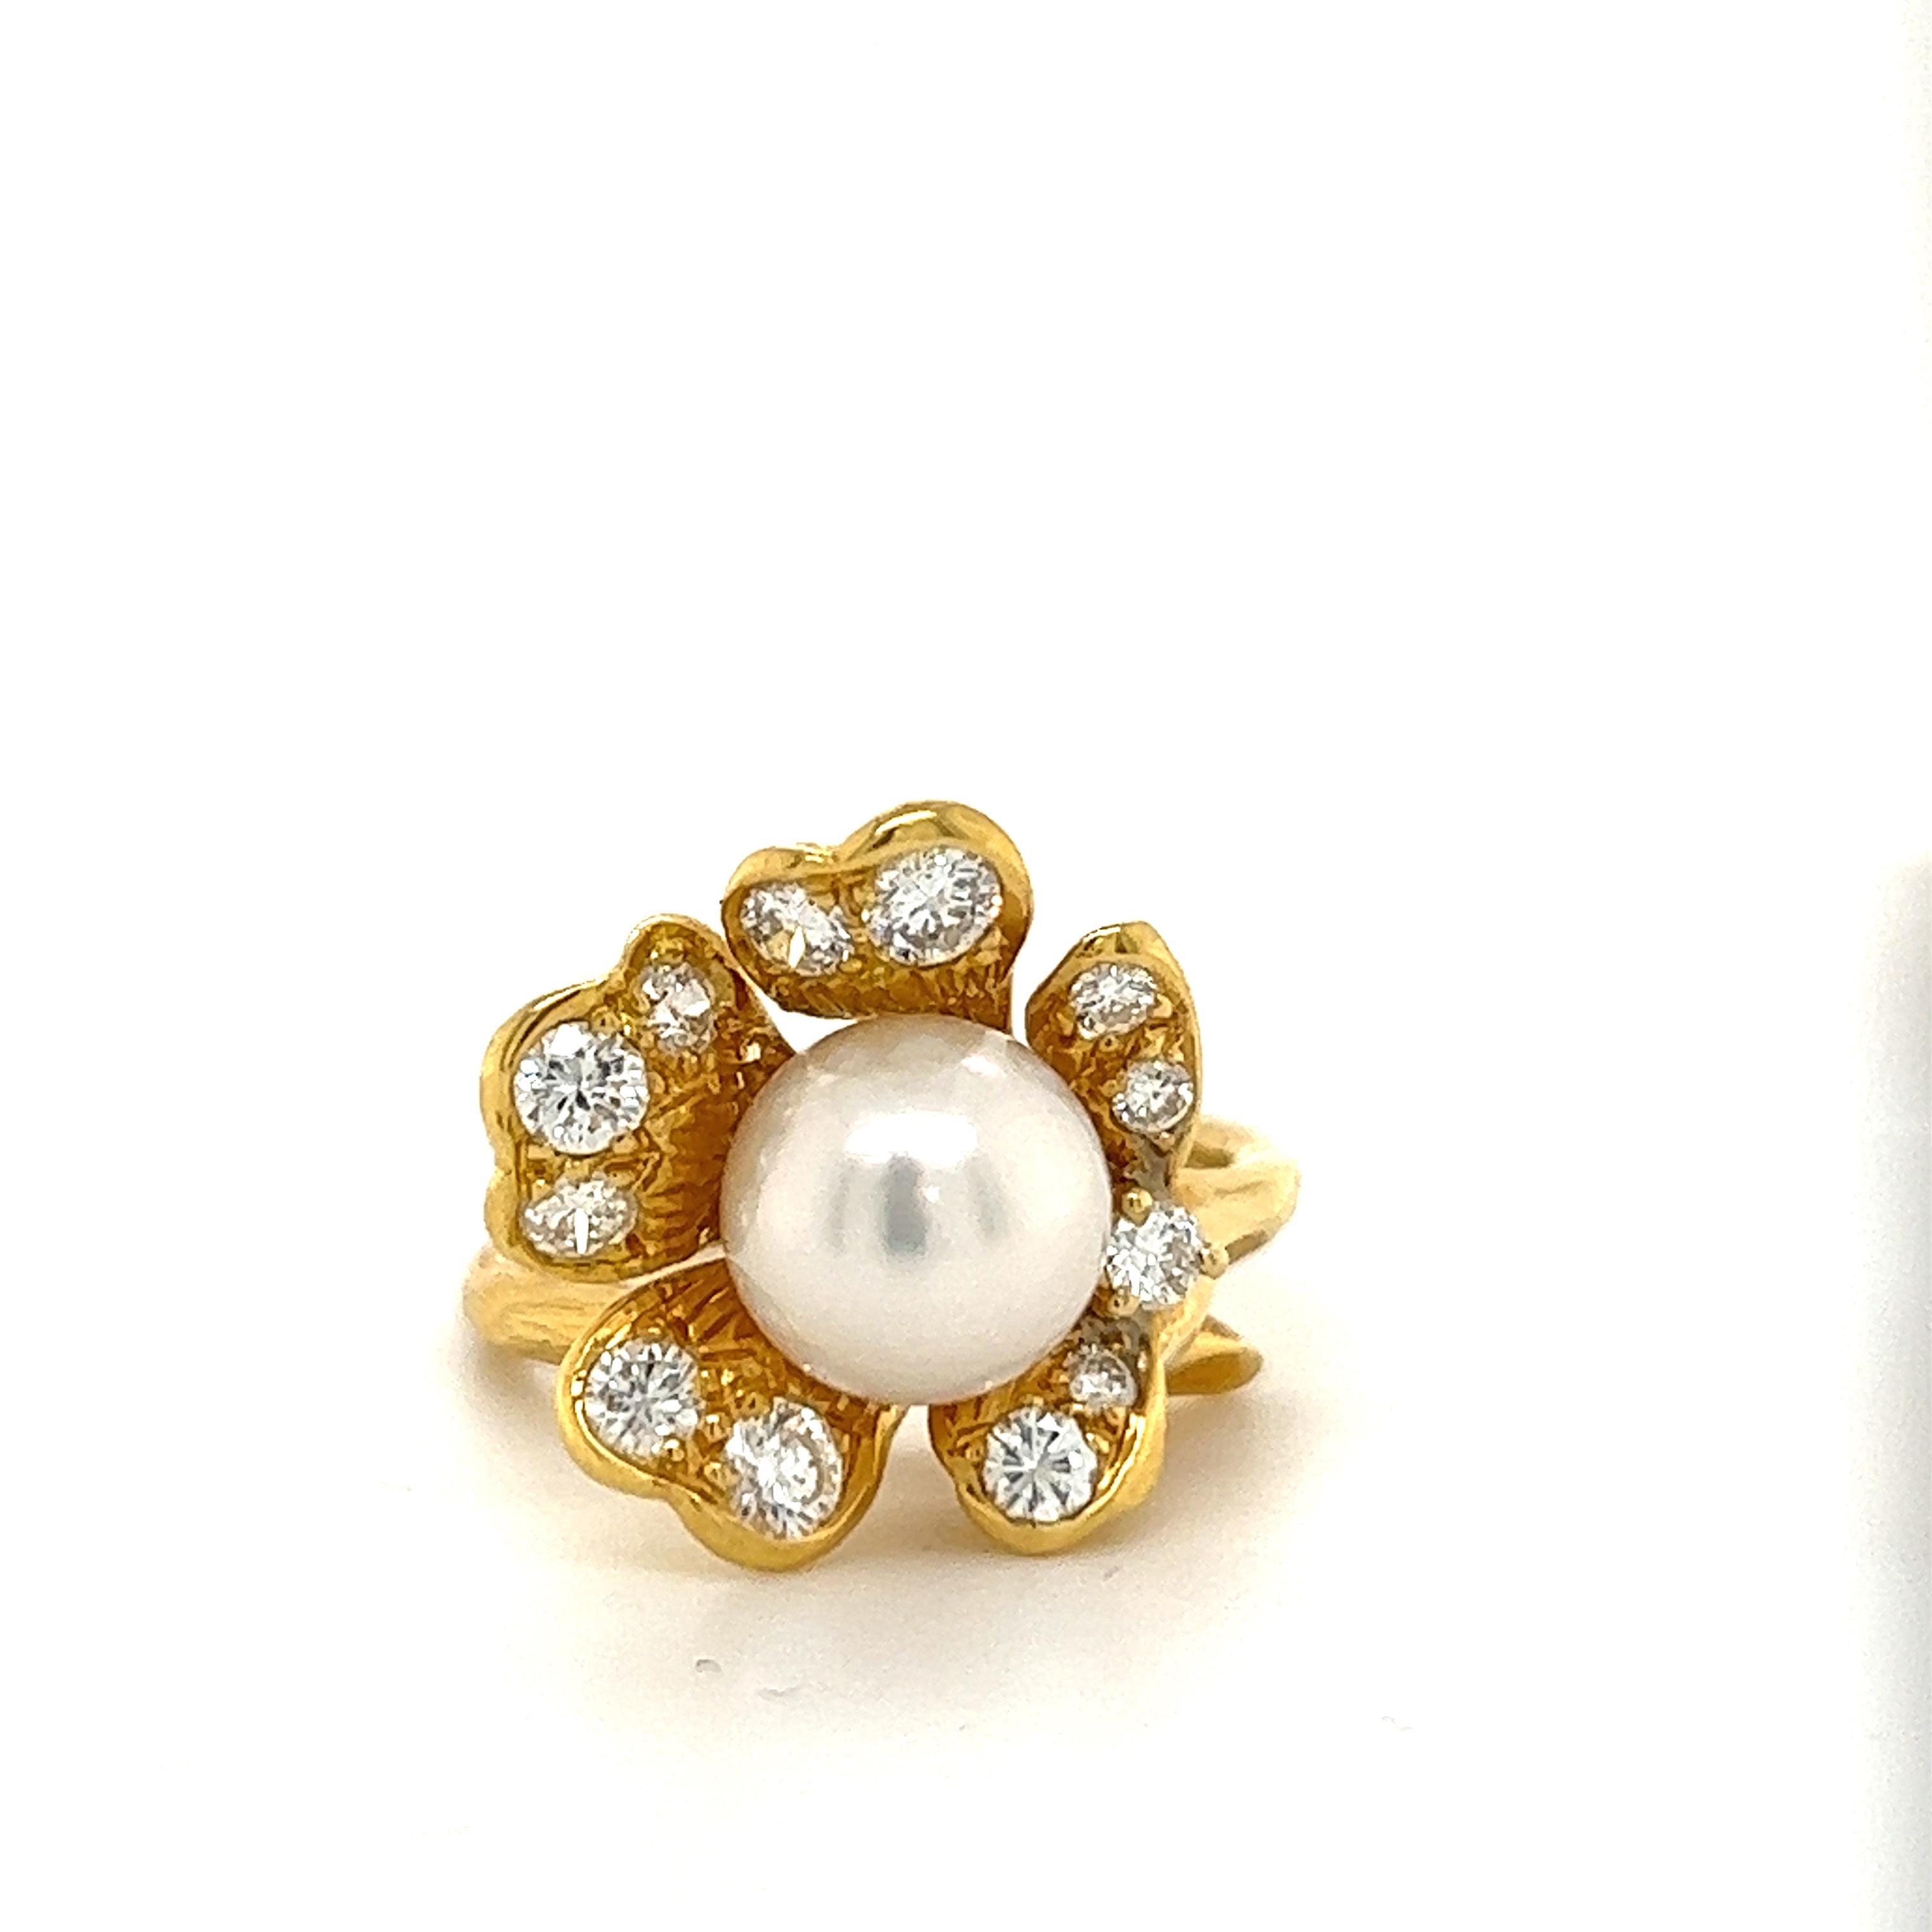 IThis unique ring is beautifully crafted. It has a akoya pearl in the center of the flower with .75tcw, G color, VS2 clarity, of white diamonds on the pedals. 